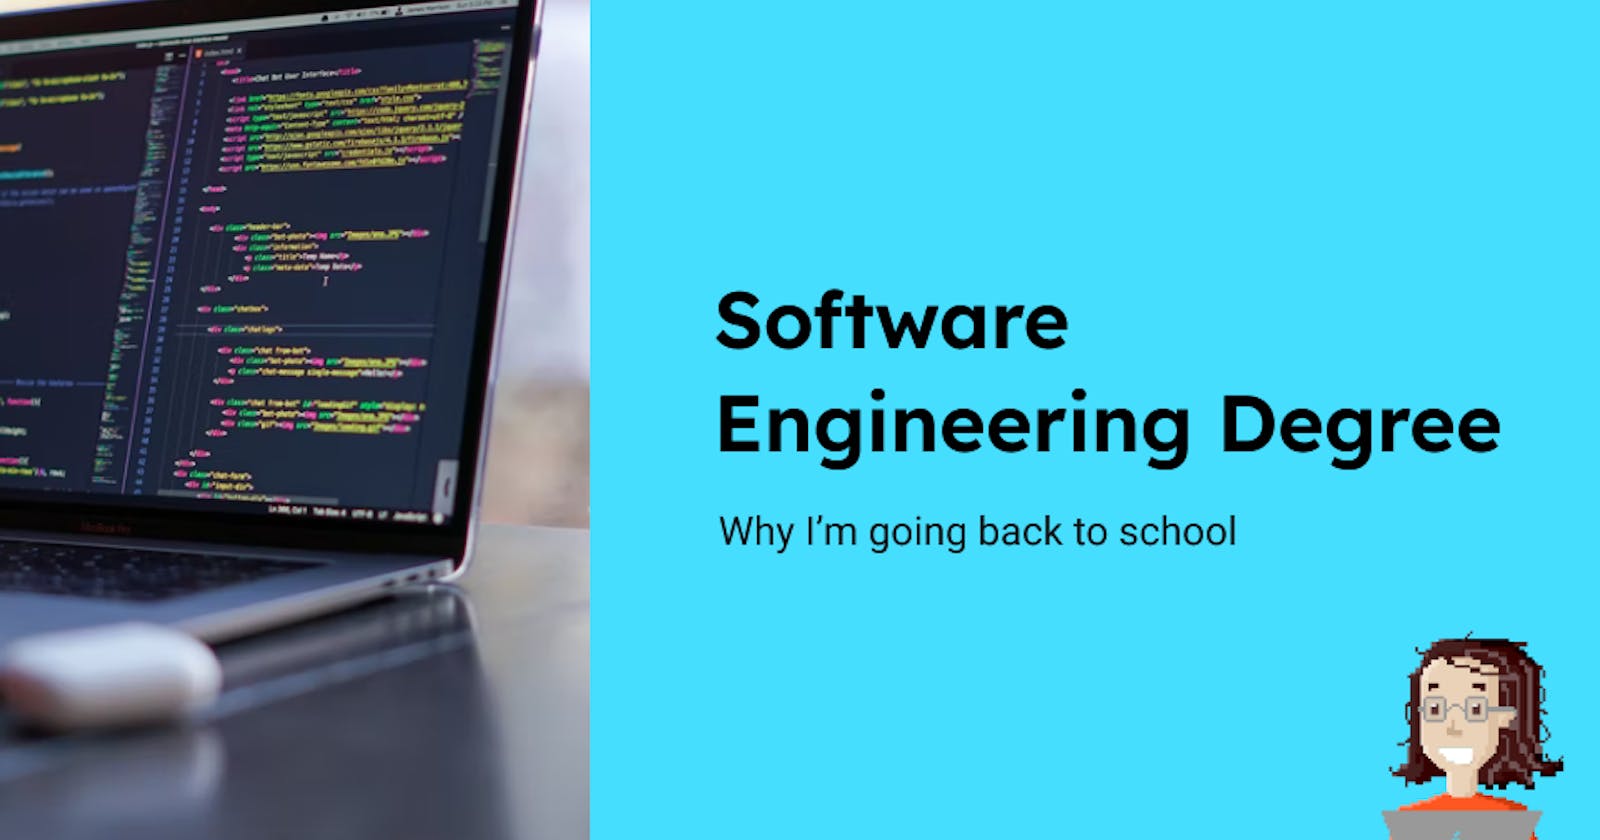 Starting a Software Engineering Degree at 26